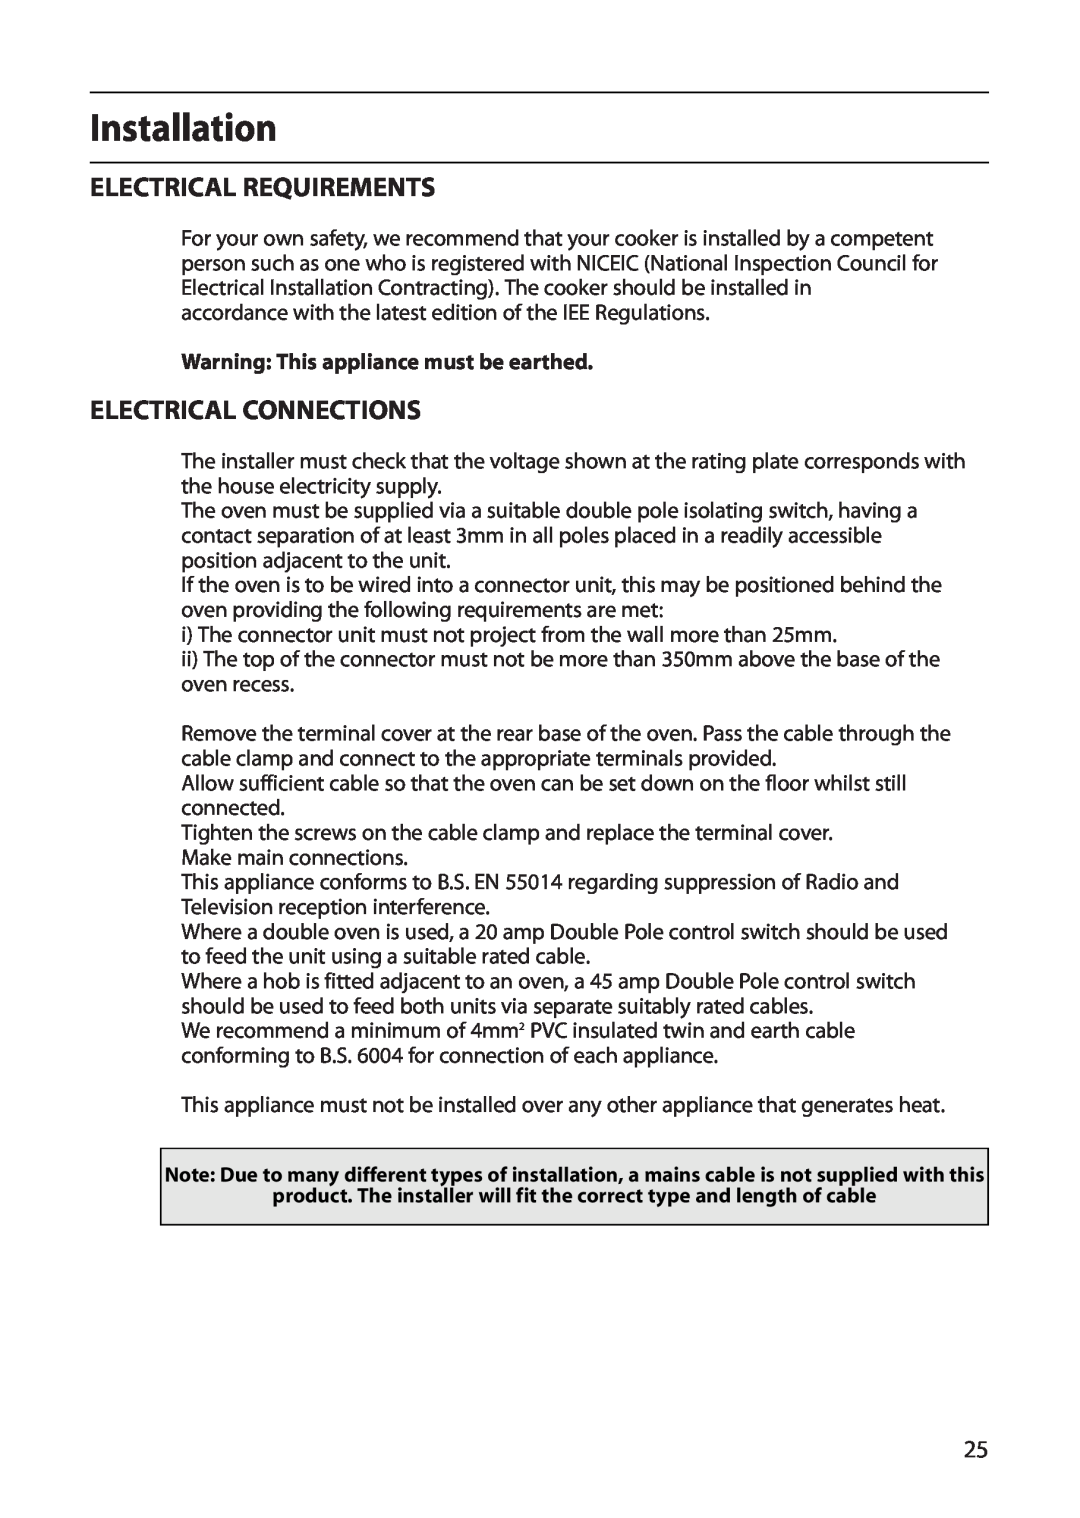 Creda D130E manual Installation, Electrical Requirements, Electrical Connections, Warning This appliance must be earthed 